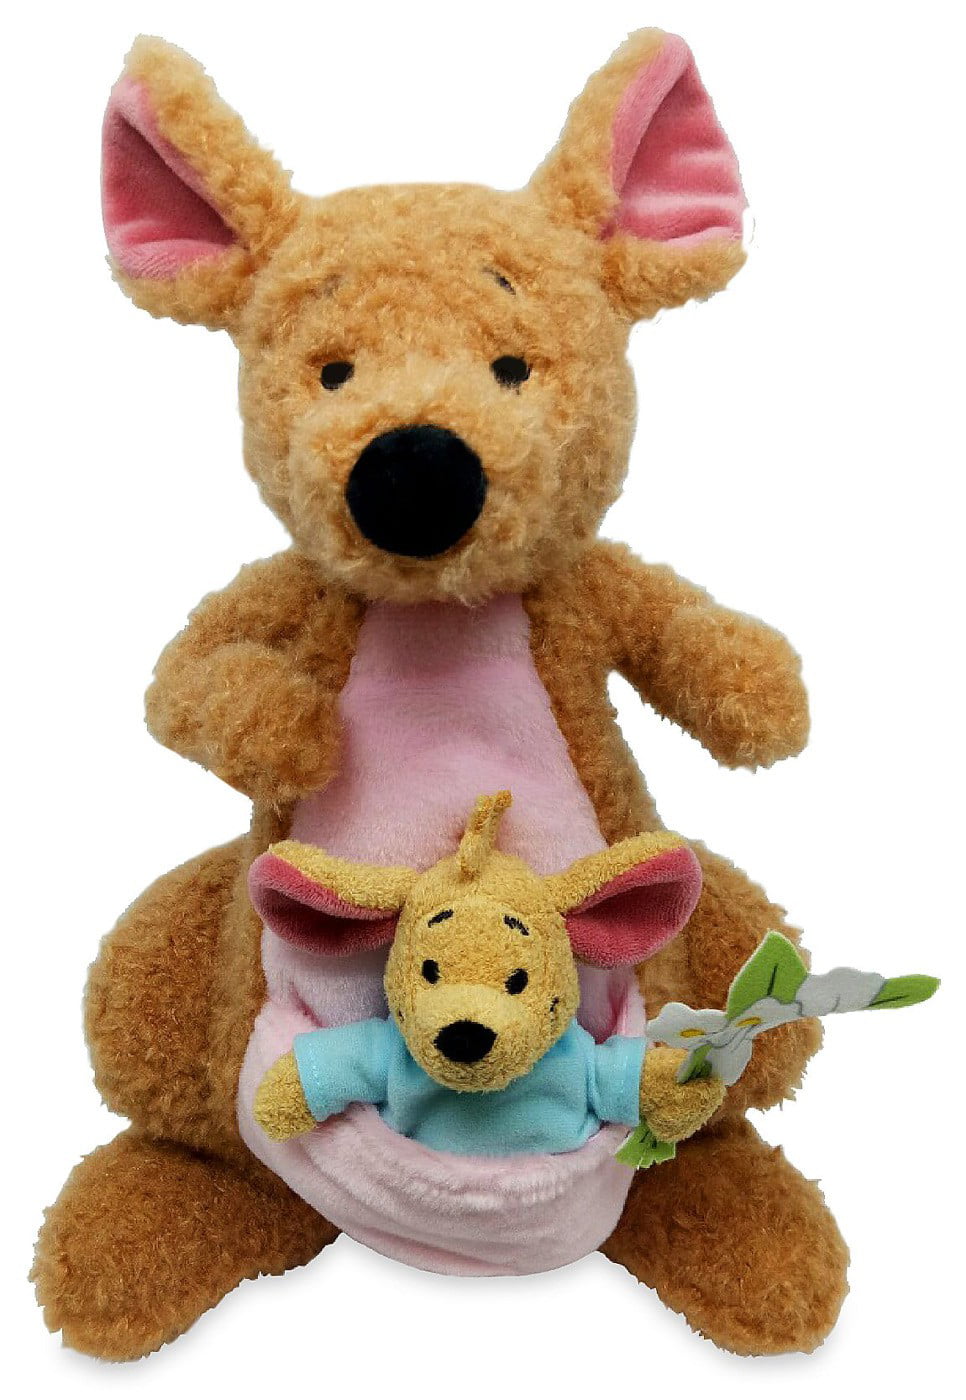 The Winnie Pooh Rabbit Official Store 2019 Plush Toy Doll Baby Kids 12" 